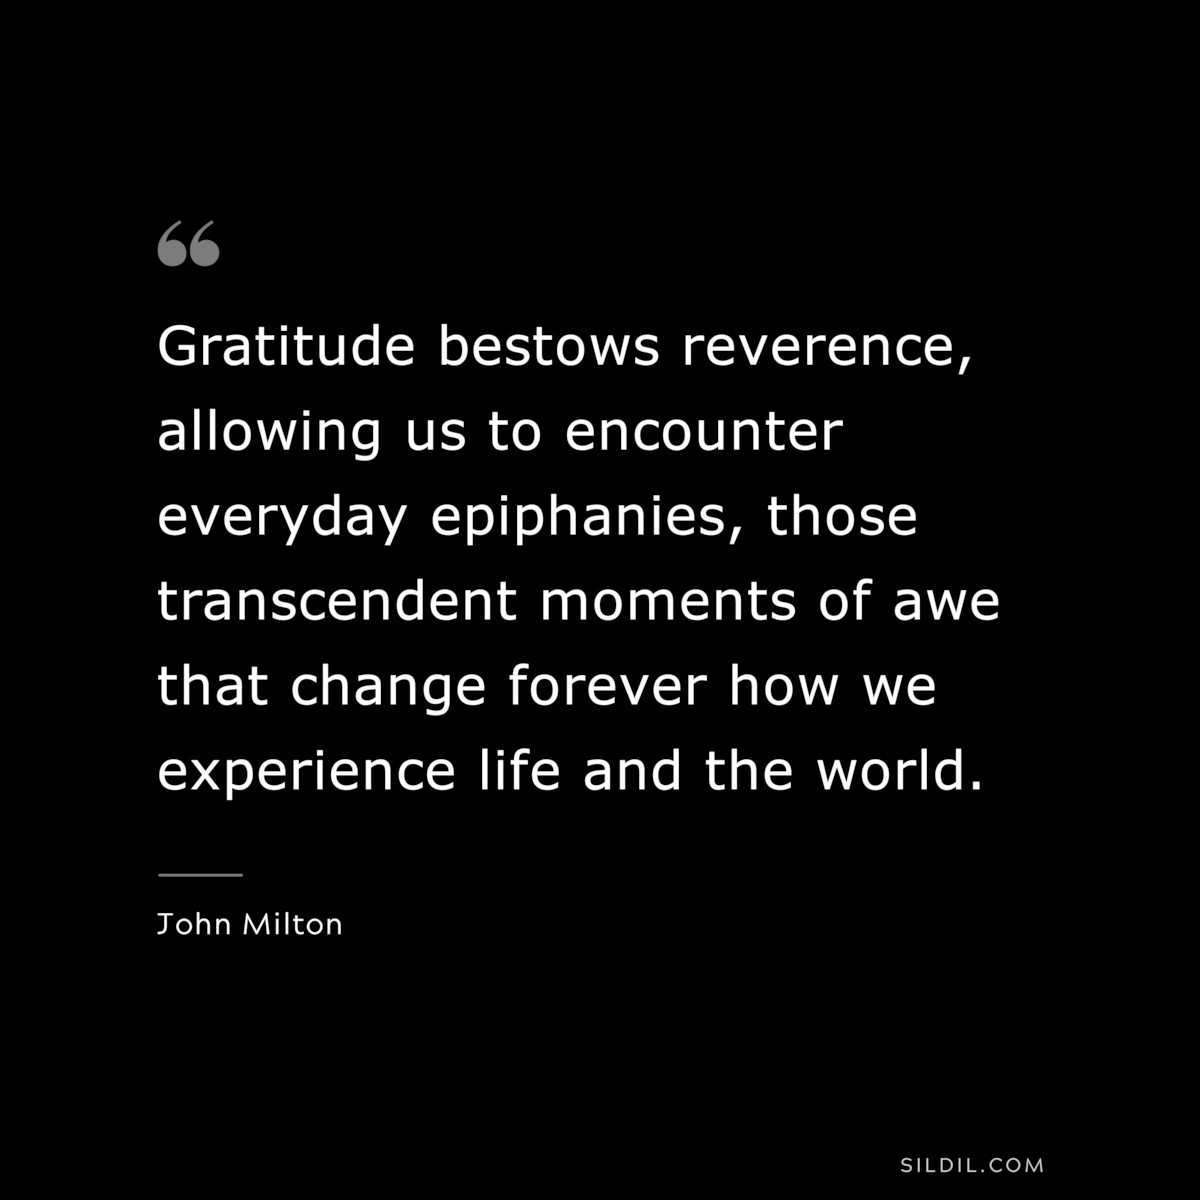 Gratitude bestows reverence, allowing us to encounter everyday epiphanies, those transcendent moments of awe that change forever how we experience life and the world. ― John Milton